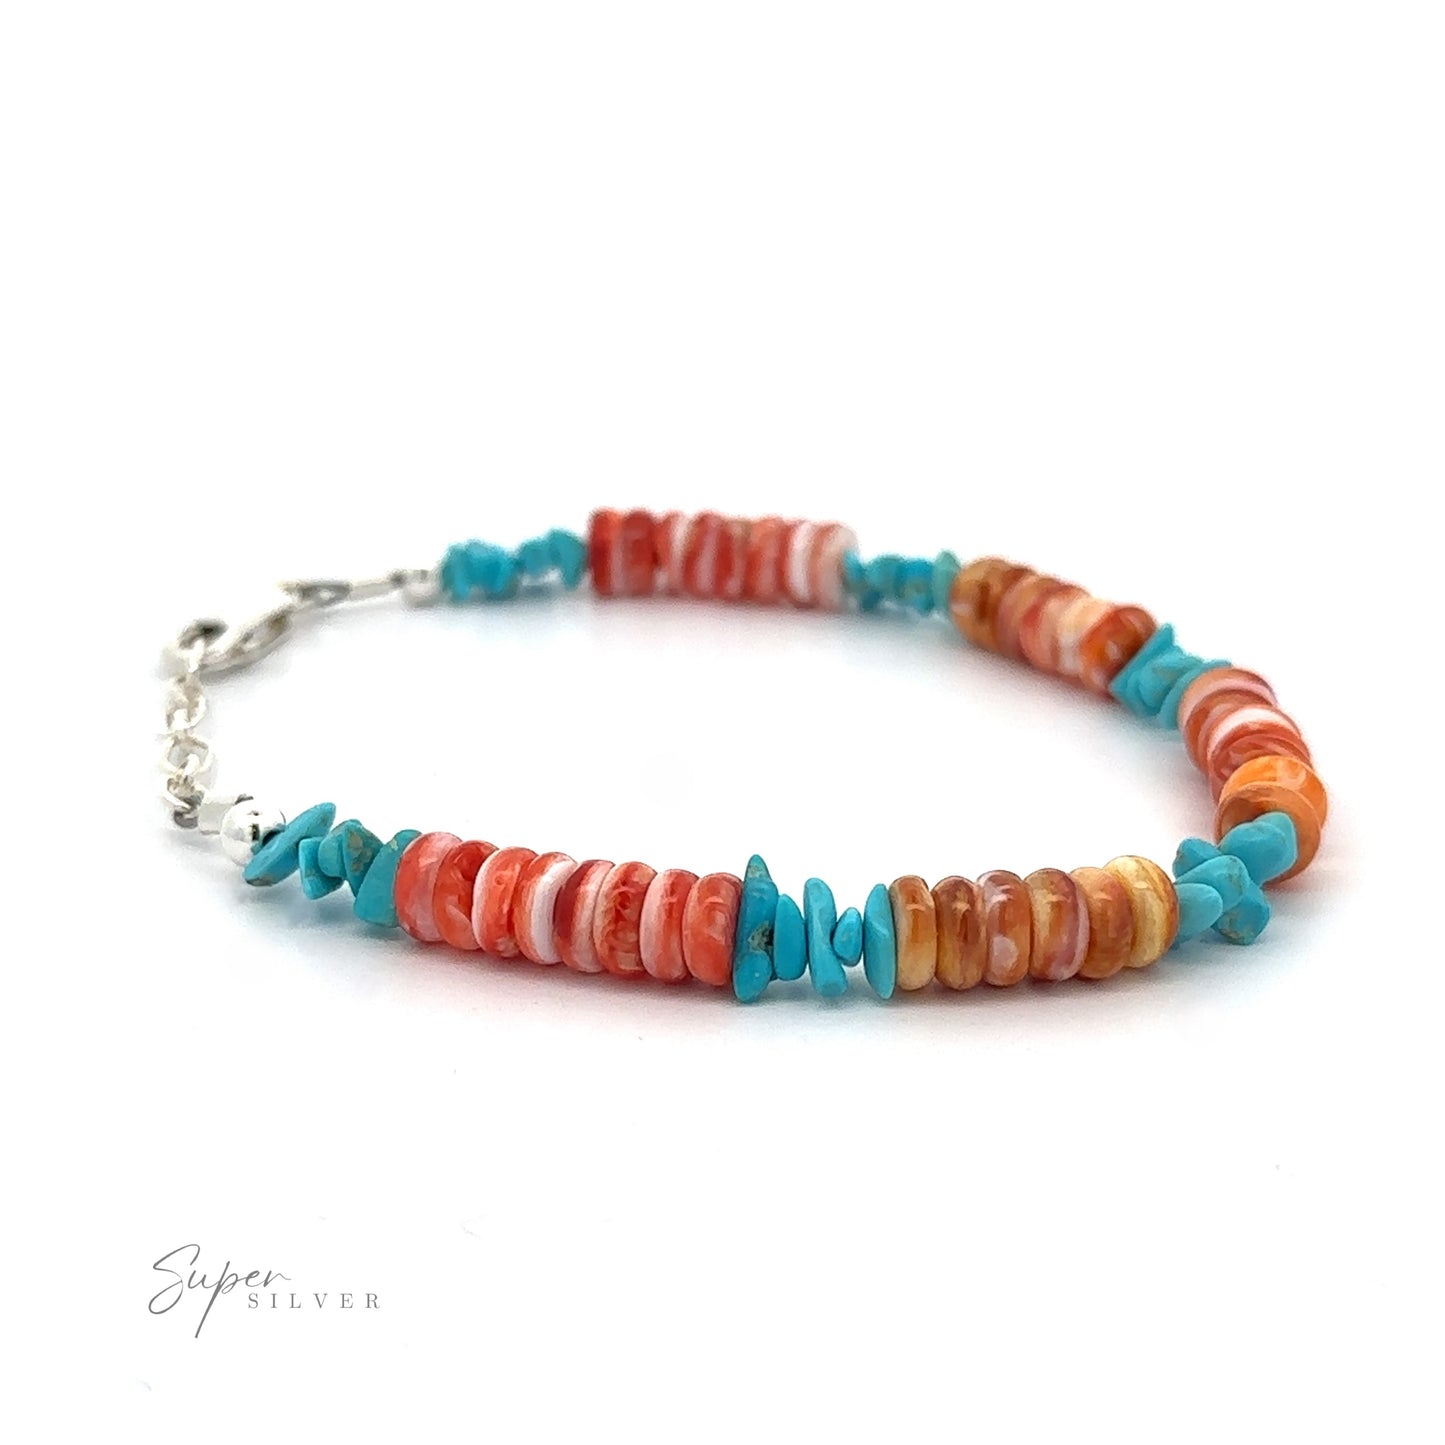 A colorful Native American Turquoise and Spiny Oyster Shell Bracelet with alternating red and turquoise beads and a silver clasp on a white background.